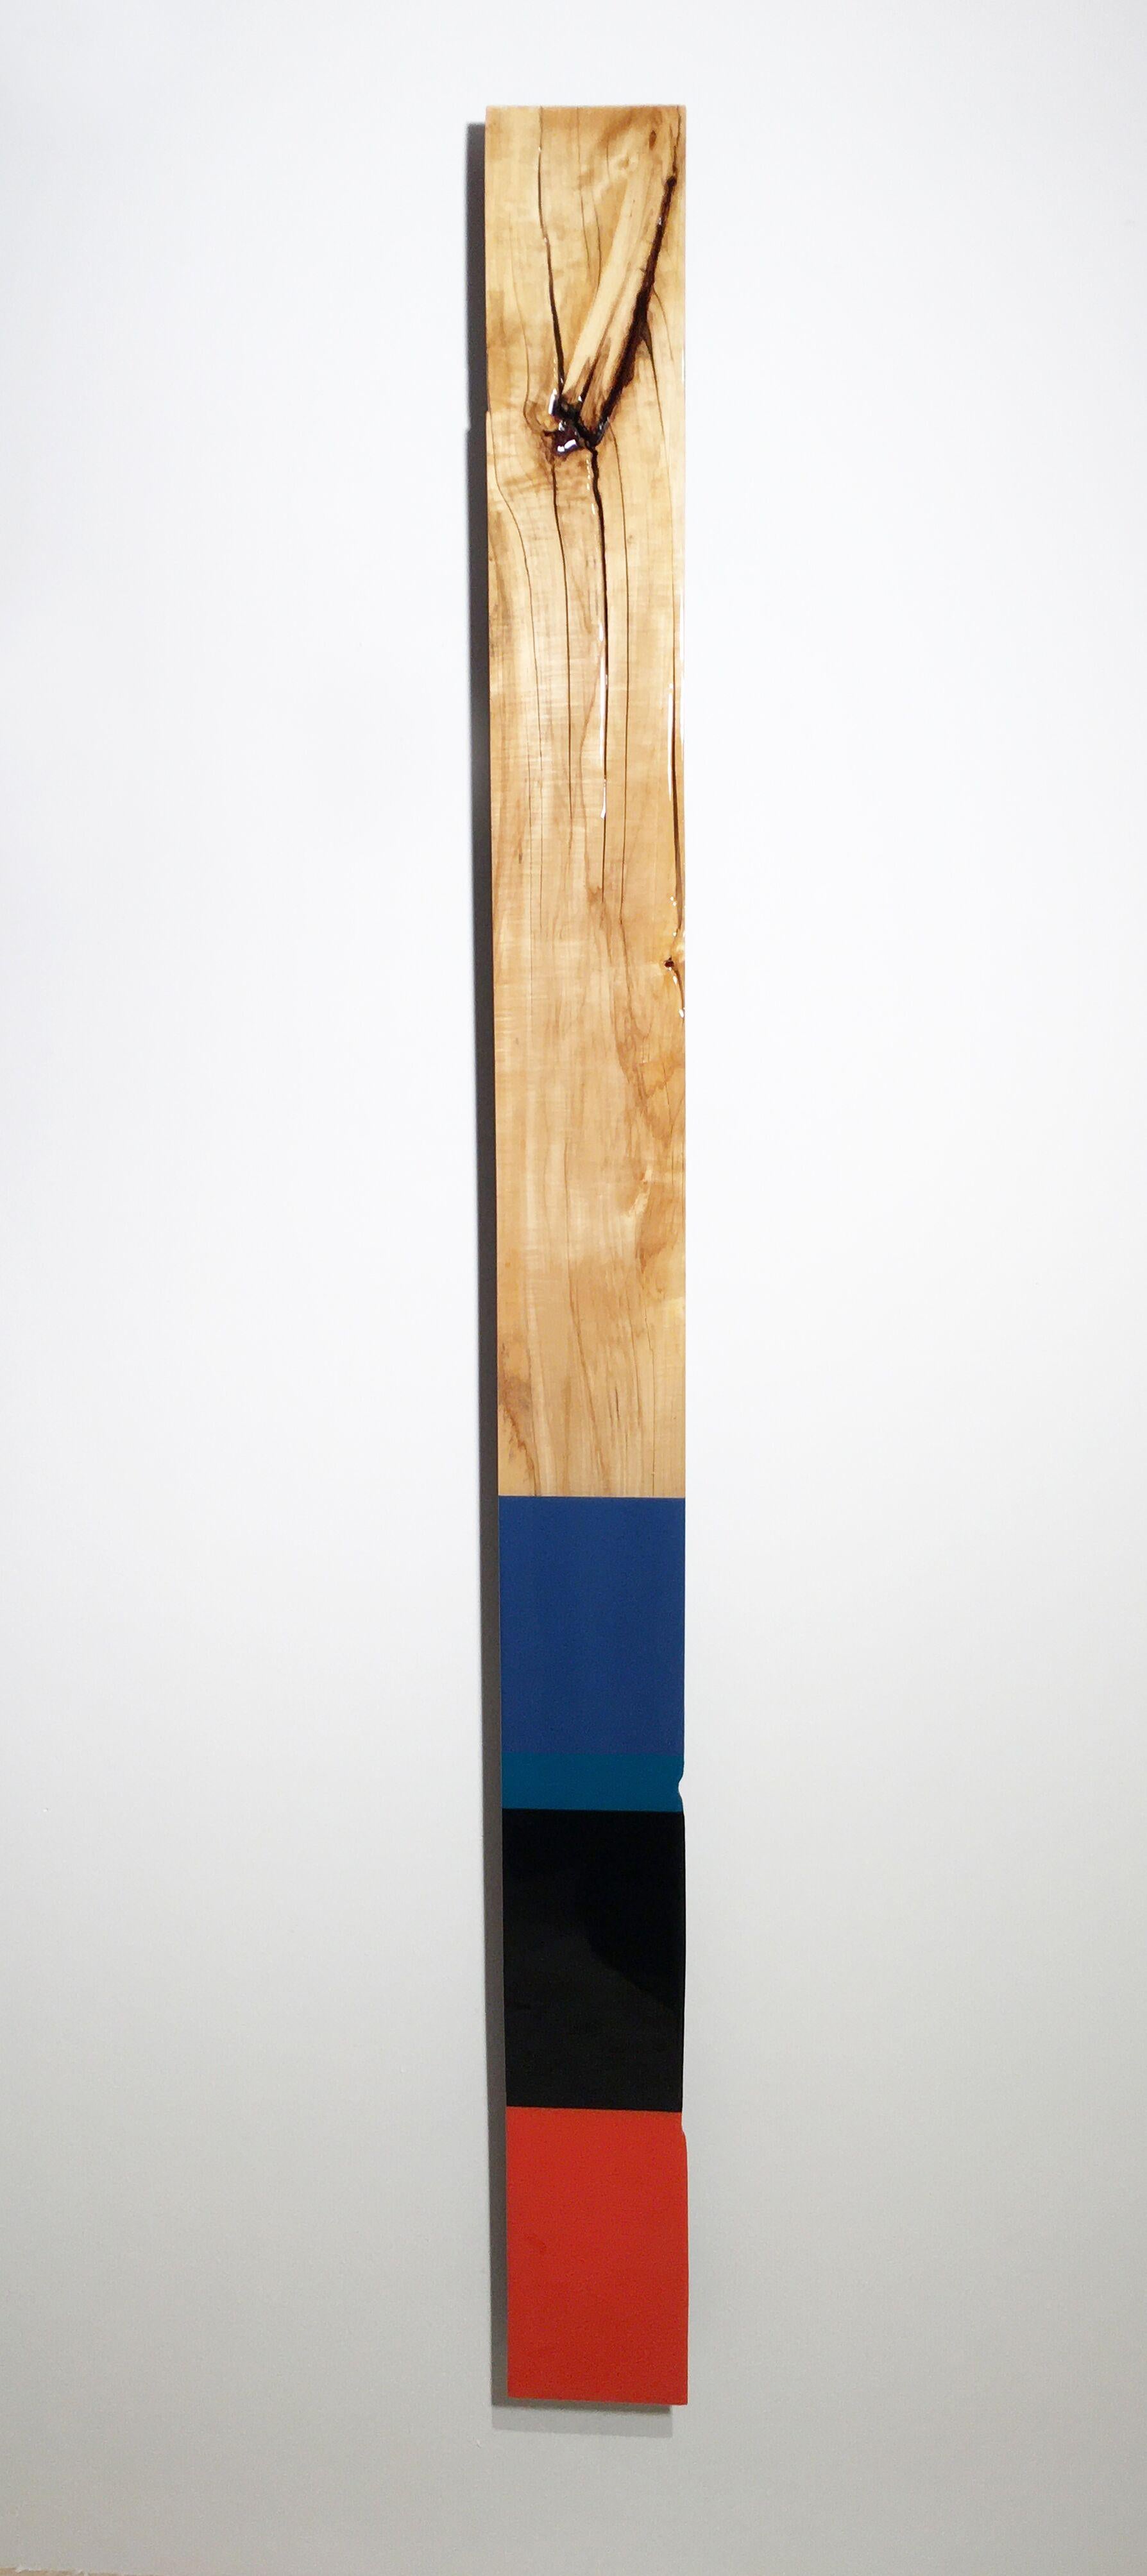 David E. Peterson Abstract Sculpture - "Leaner 71"